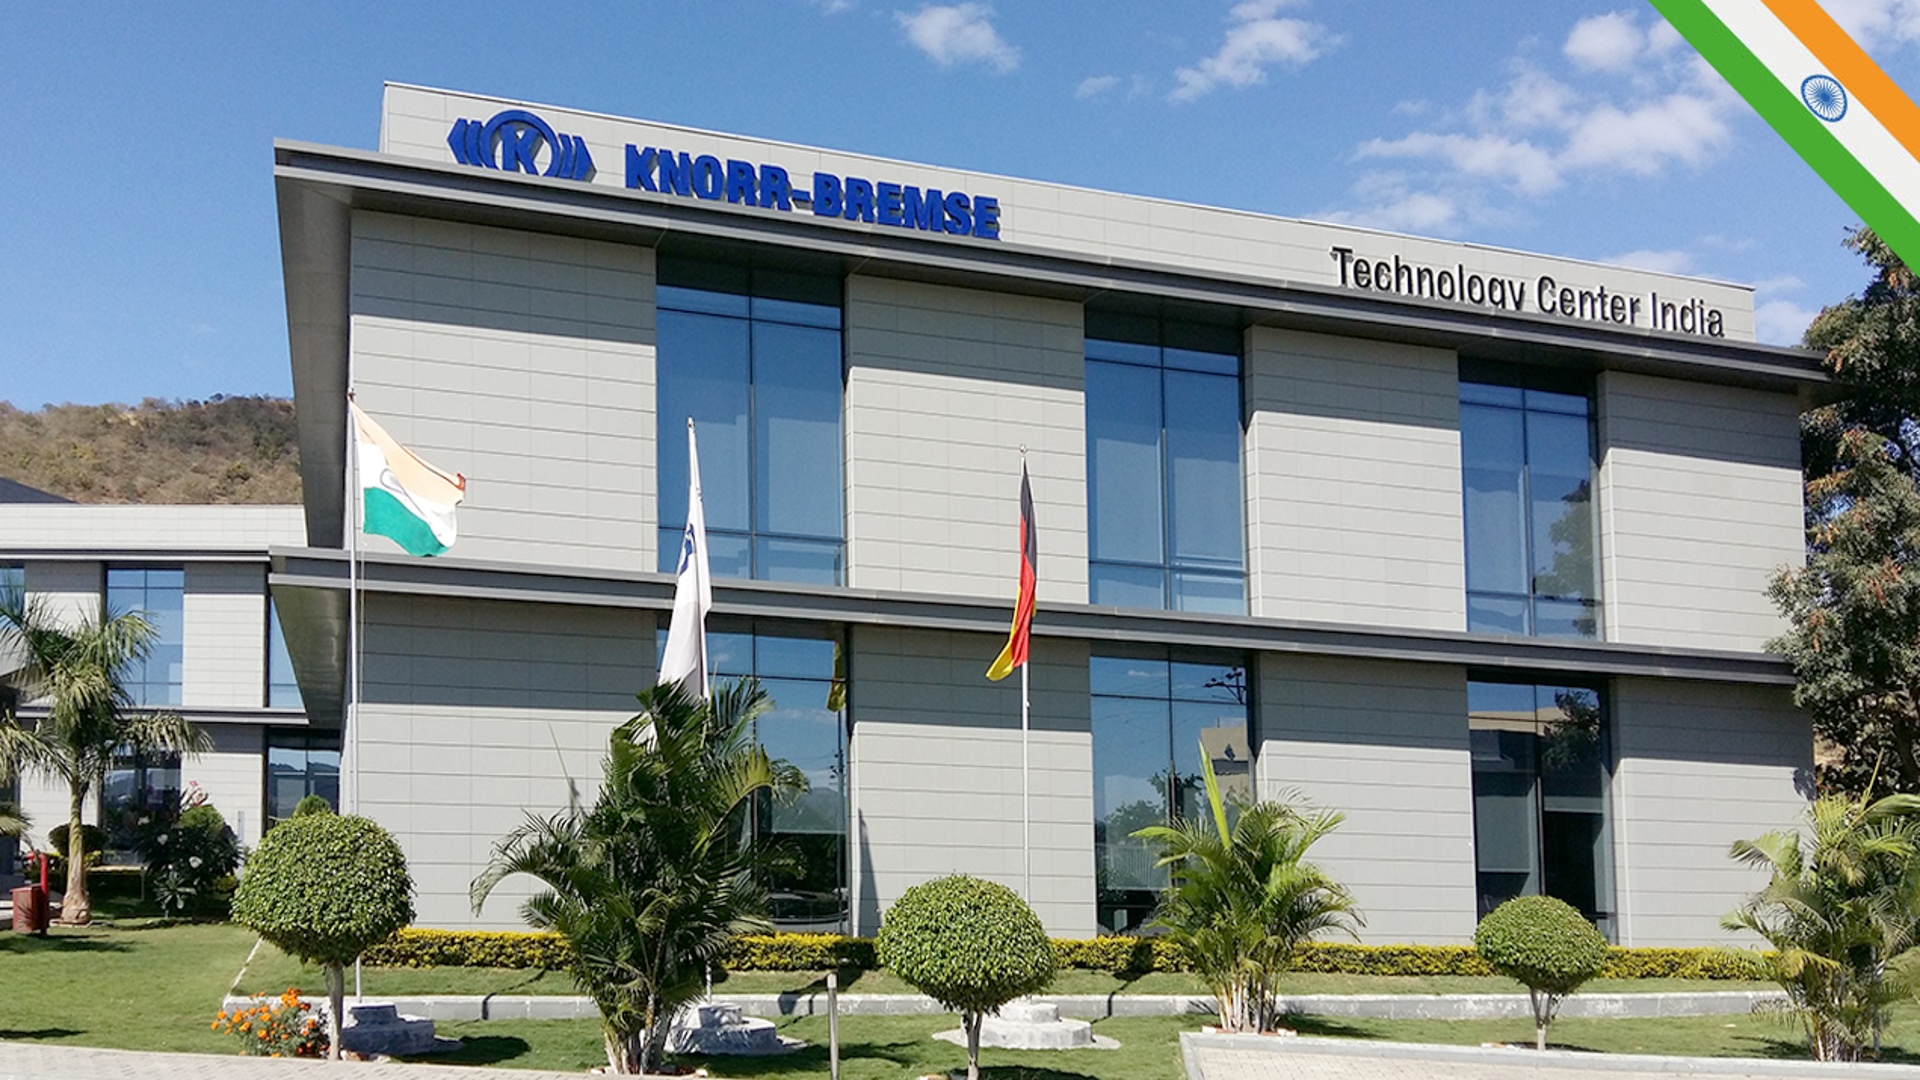 Knorr-Bremse Technology Center India building from the outside with logo and company lettering, located in Pune.